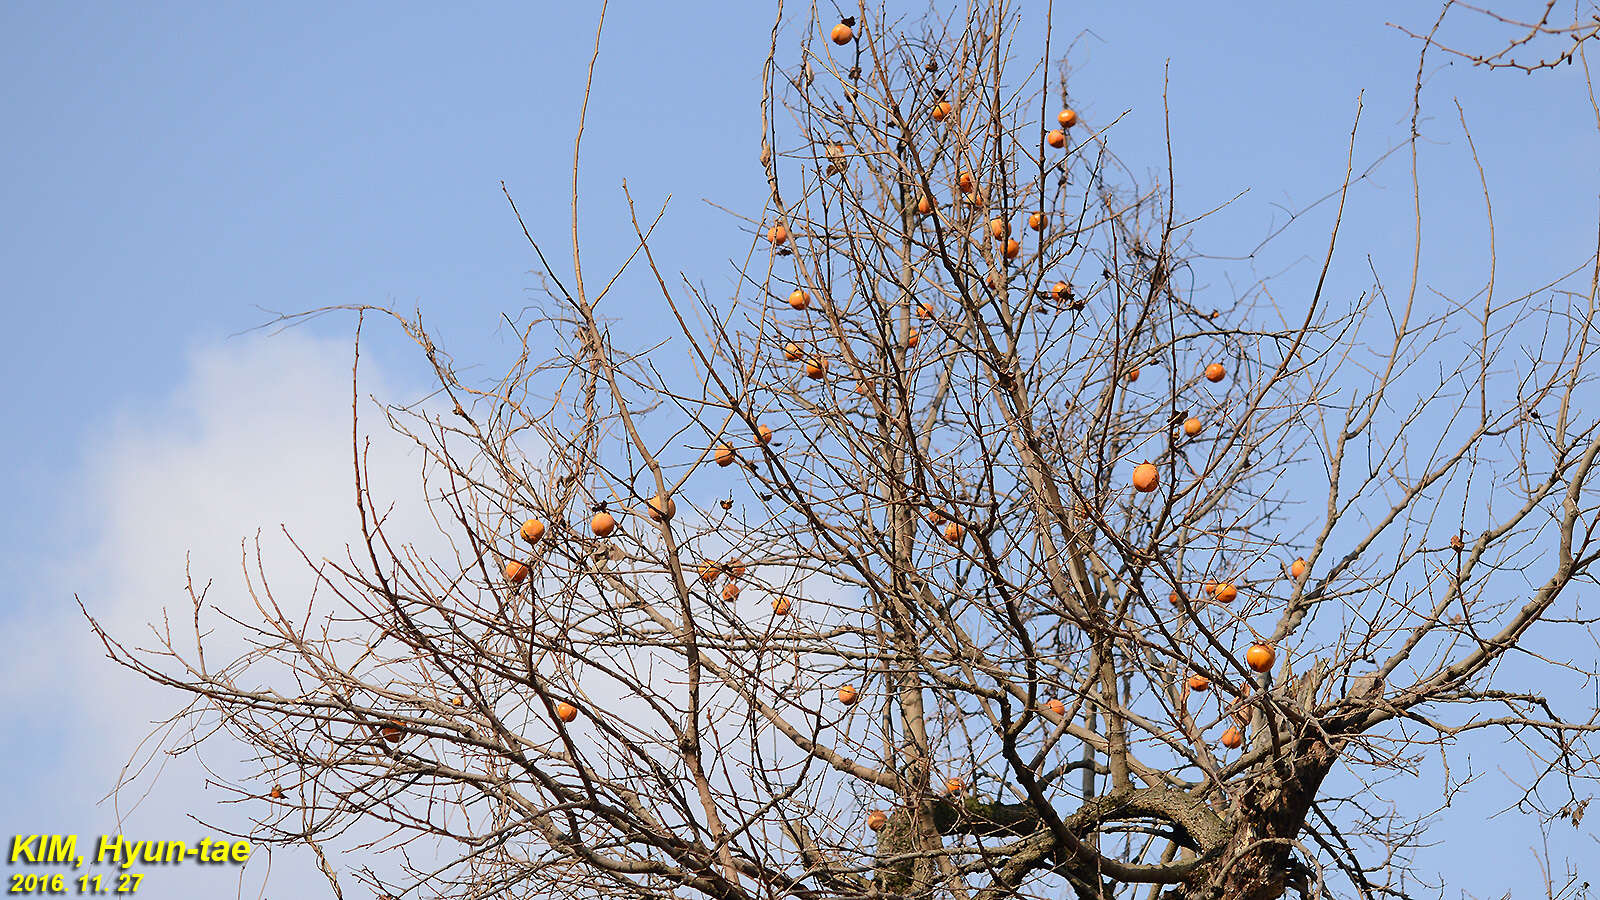 Image of japanese persimmon